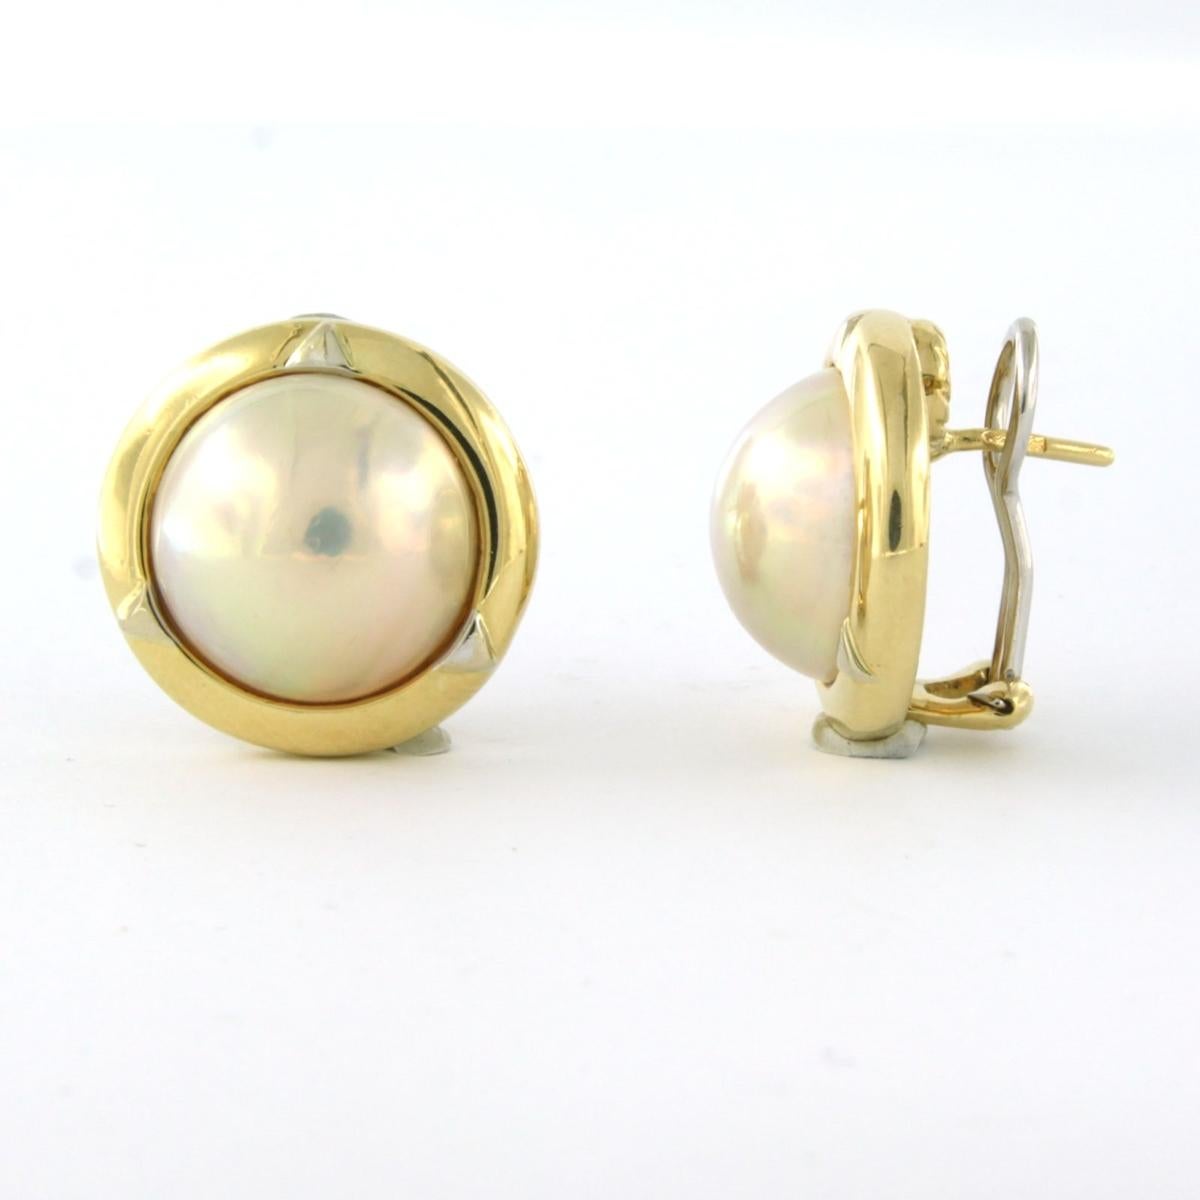 18k yellow gold ear clips set with mabee

detailed description:

The front of the ear clip is 1.8 cm wide

weight: 12.2 grams

set with

- 2 x 1.3 cm mabee pearl

color pink
purity n/a
Gemstones have often been treated to improve color or clarity.